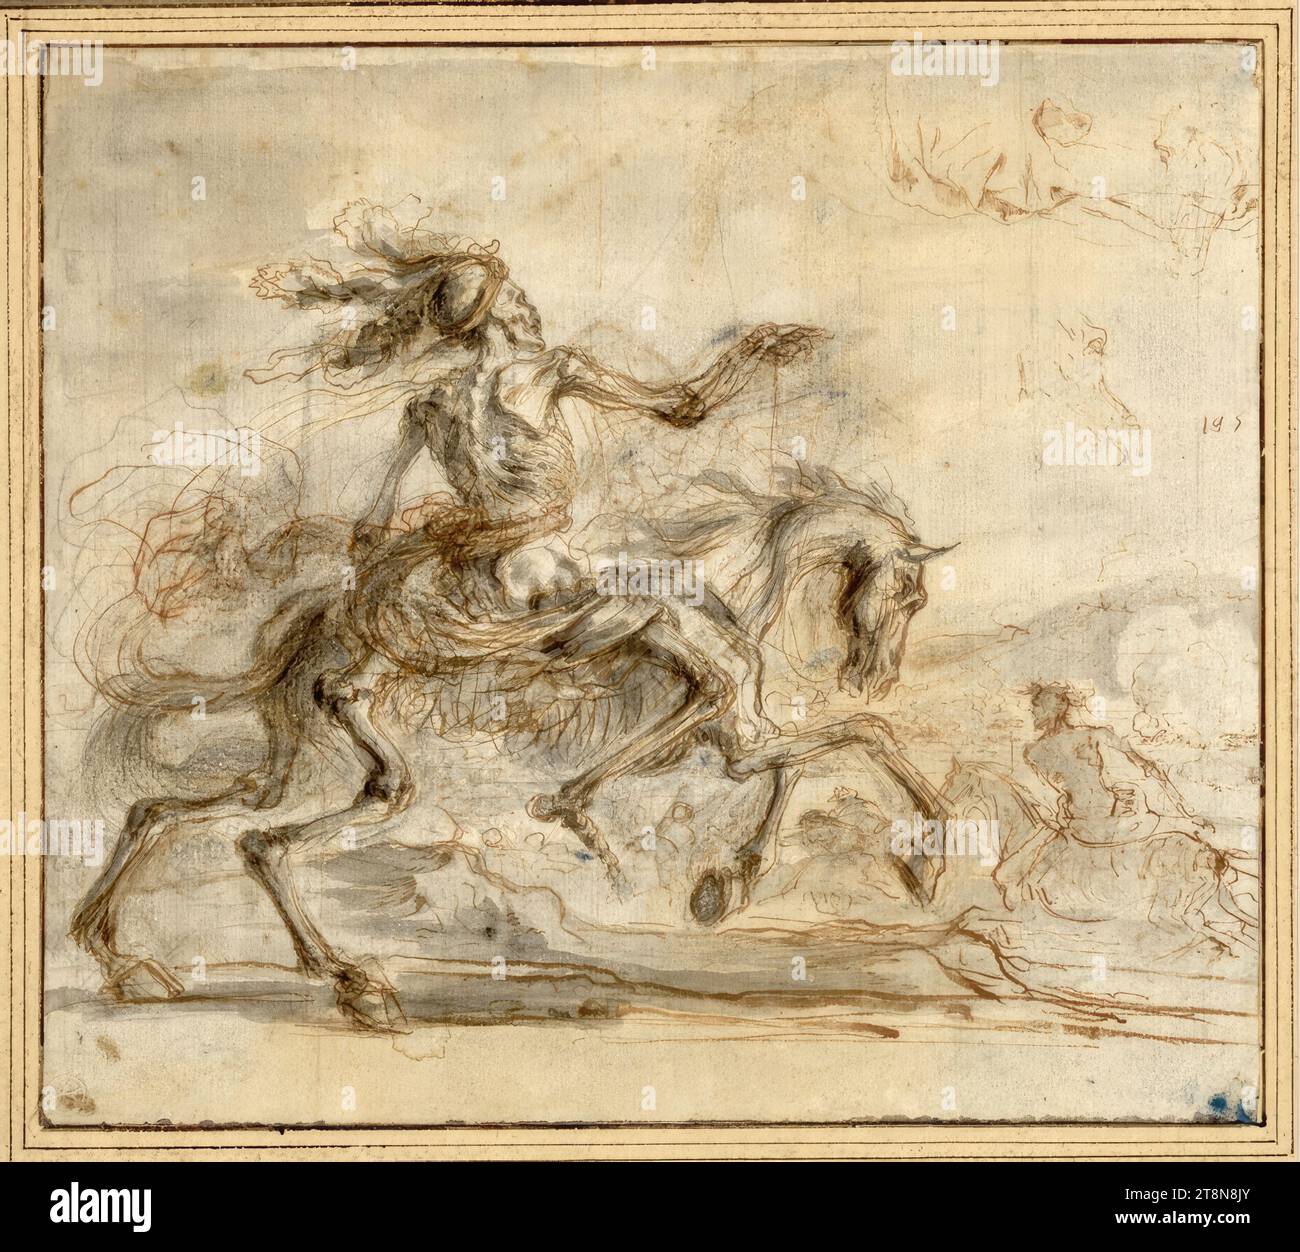 Death rides right across a battlefield; Studies of robes and horses top right, Stefano della Bella (Florence 1610 - 1664 Florence), between 1639 and 1650, drawing, brown pen, brush, gray and brown wash, over black pen and sanguine, squaring with black pen, 19.5 x 22 cm, l.l. Count Moriz von Fries, r.b. Duke Albert of Saxe-Teschen, middle right with pen old number '195 Stock Photo